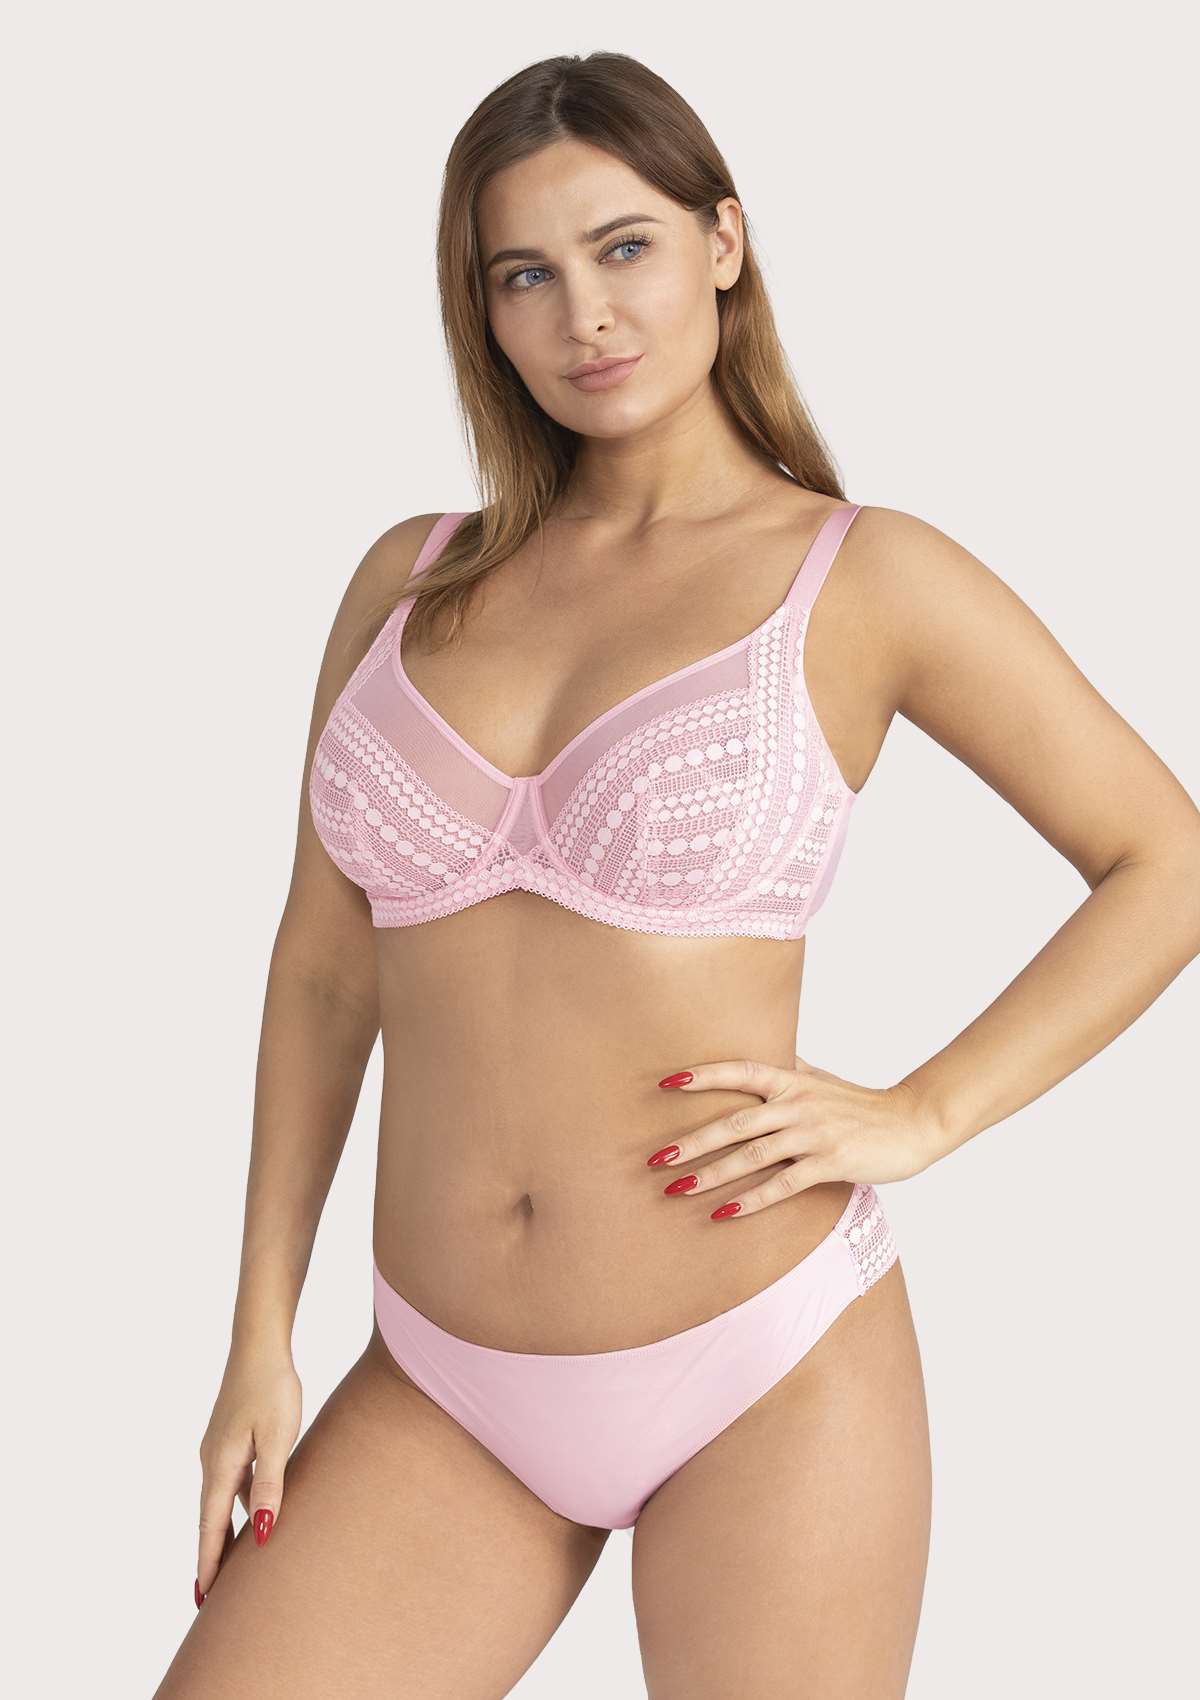 HSIA Heroine Lace Bra And Panties Set: Most Comfortable Supportive Bra - Pink / 36 / C